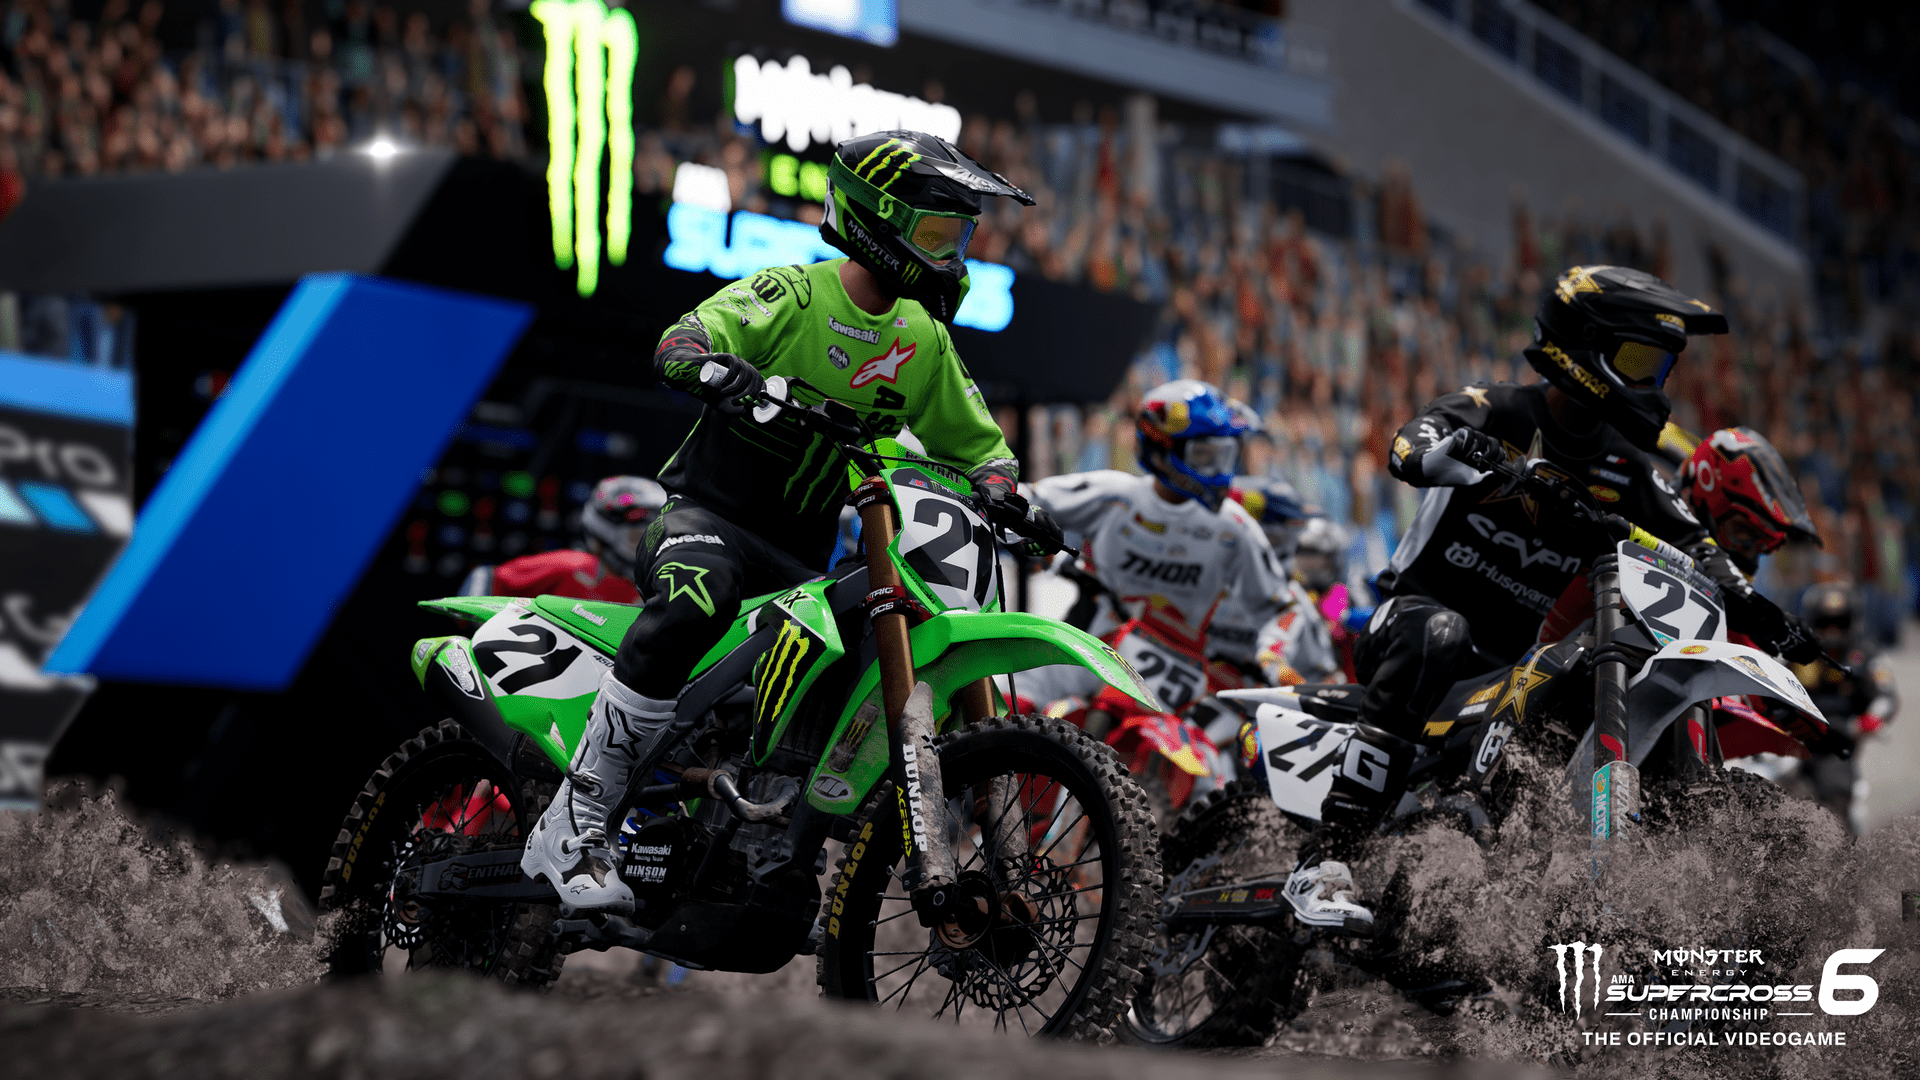 Monster Energy Supercross - The Official Videogame 6 (8)